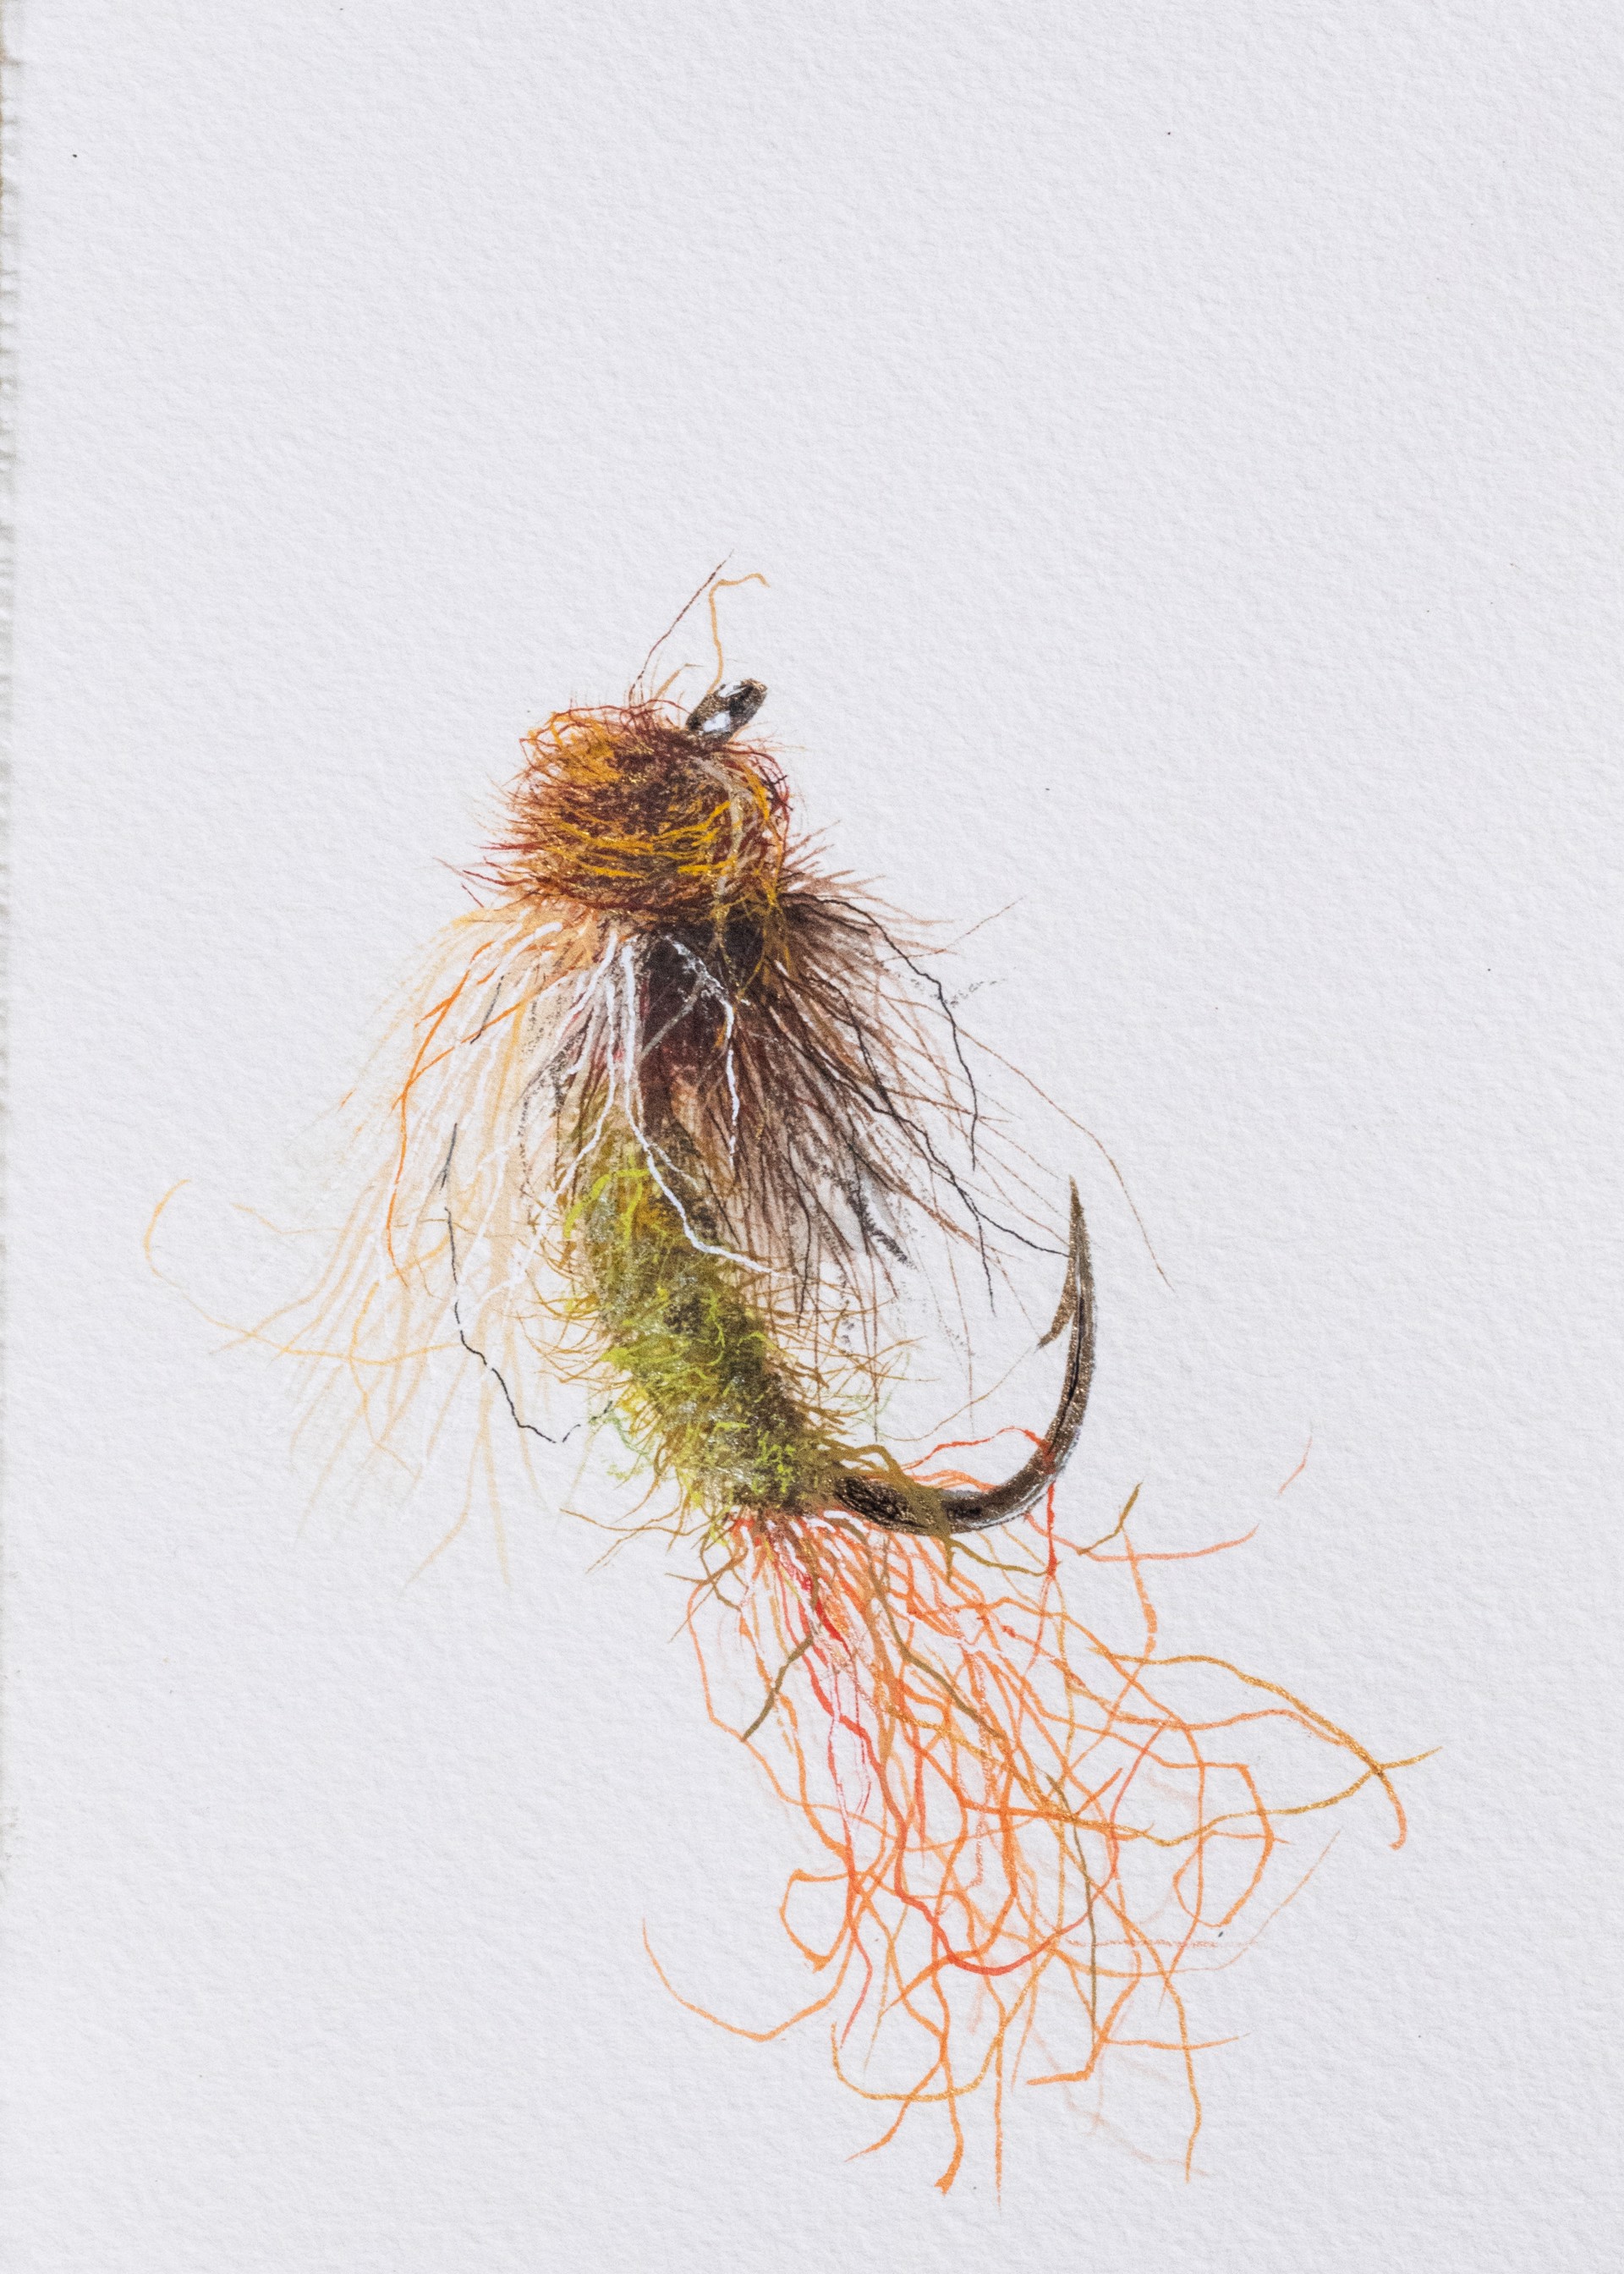 Rabbits Foot Emerger by Meredith Mejerle